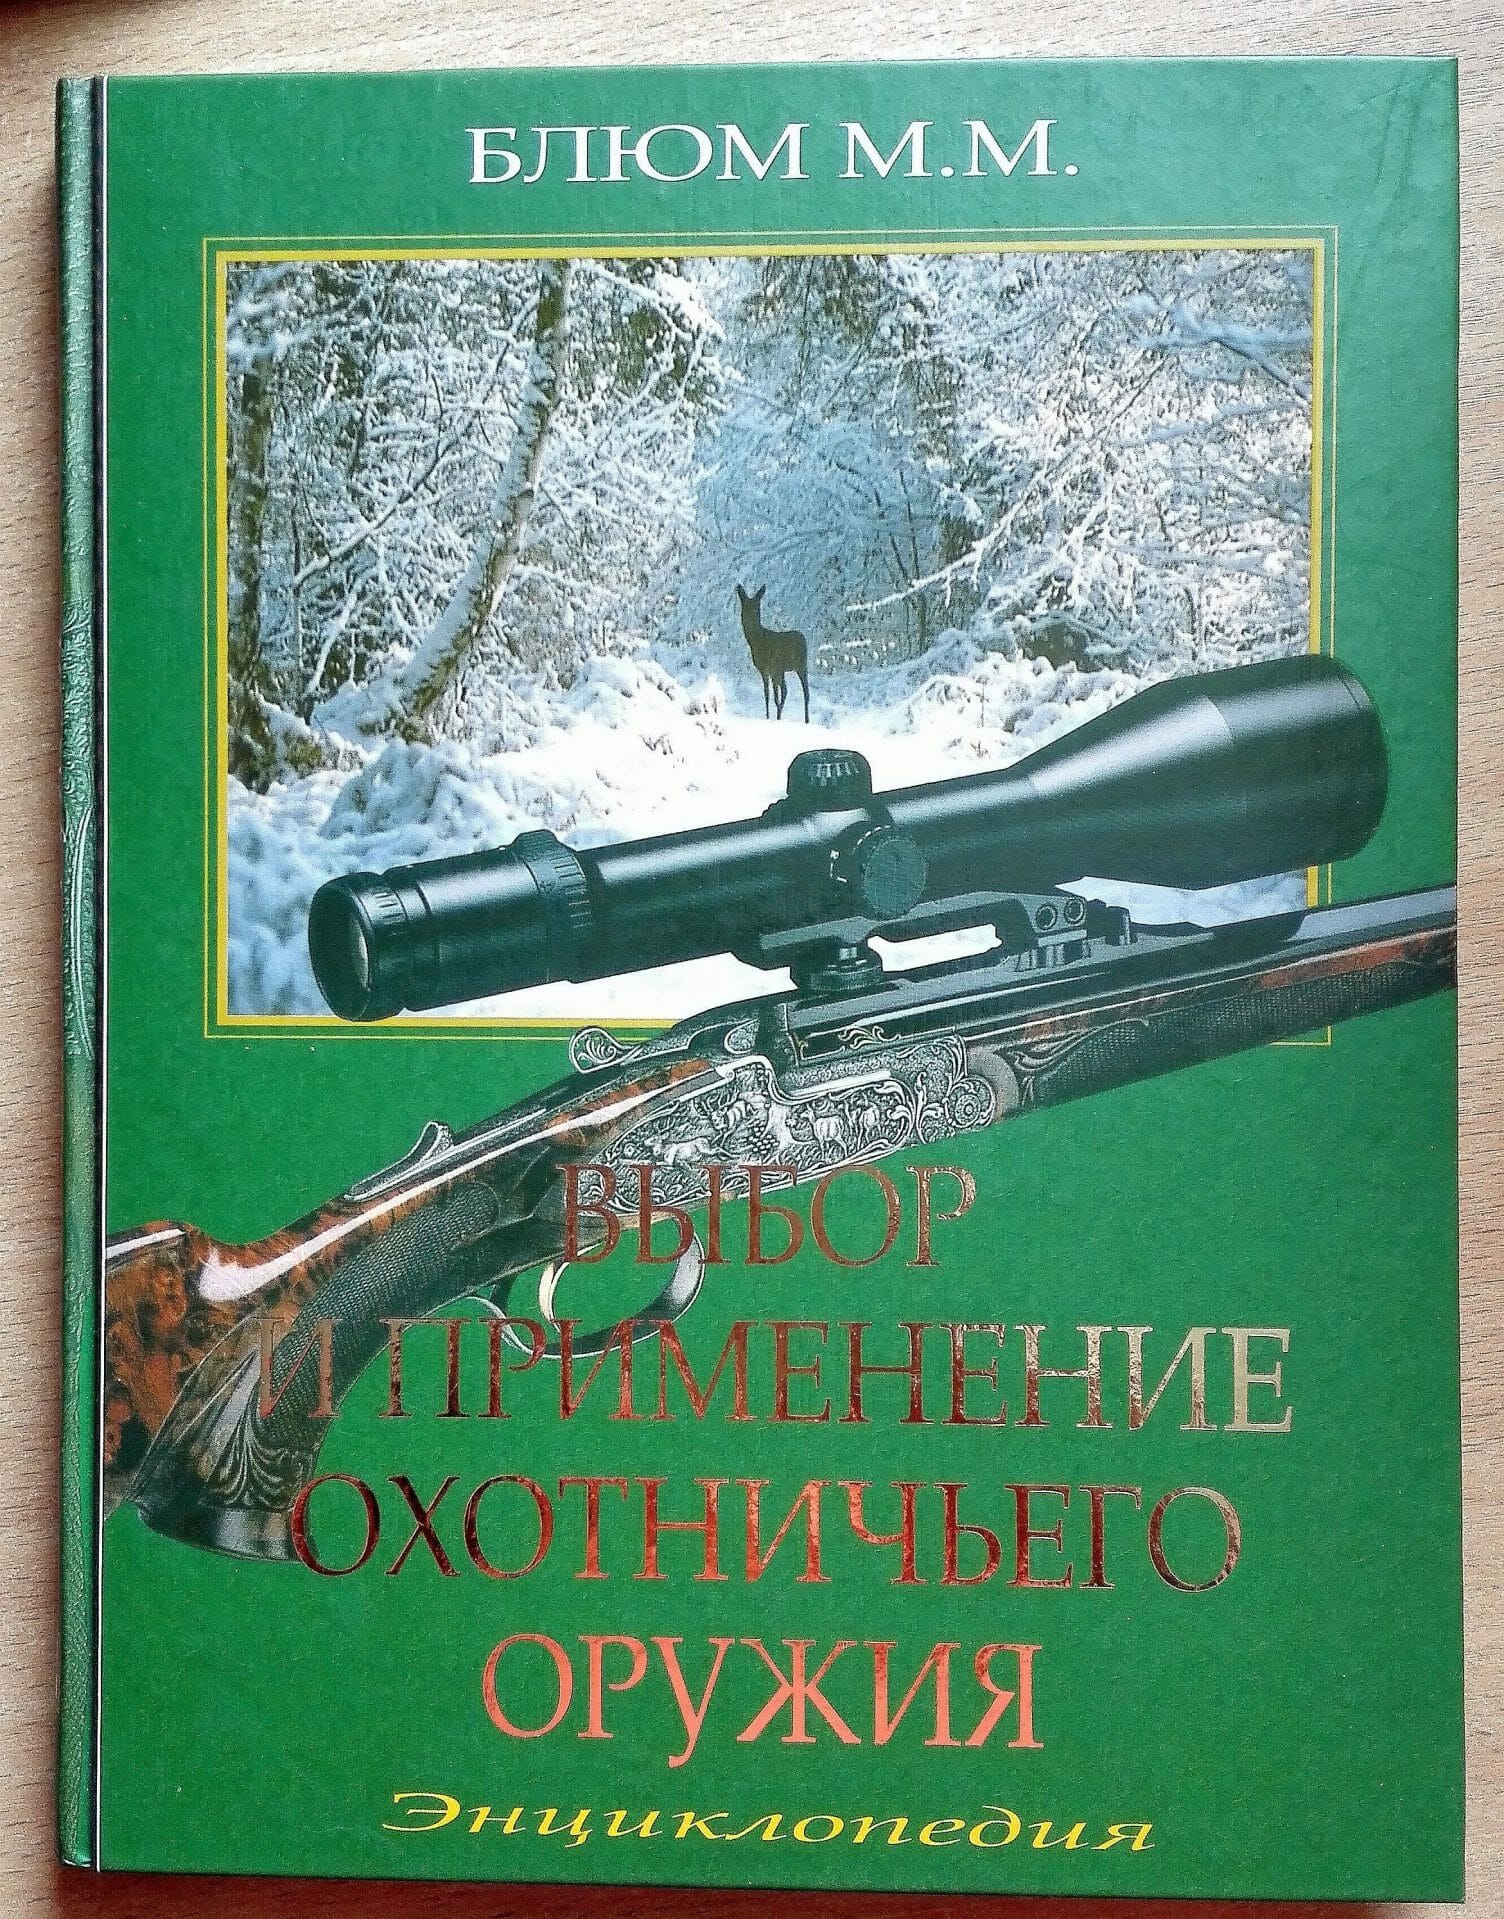 book selection and use of hunting weapons